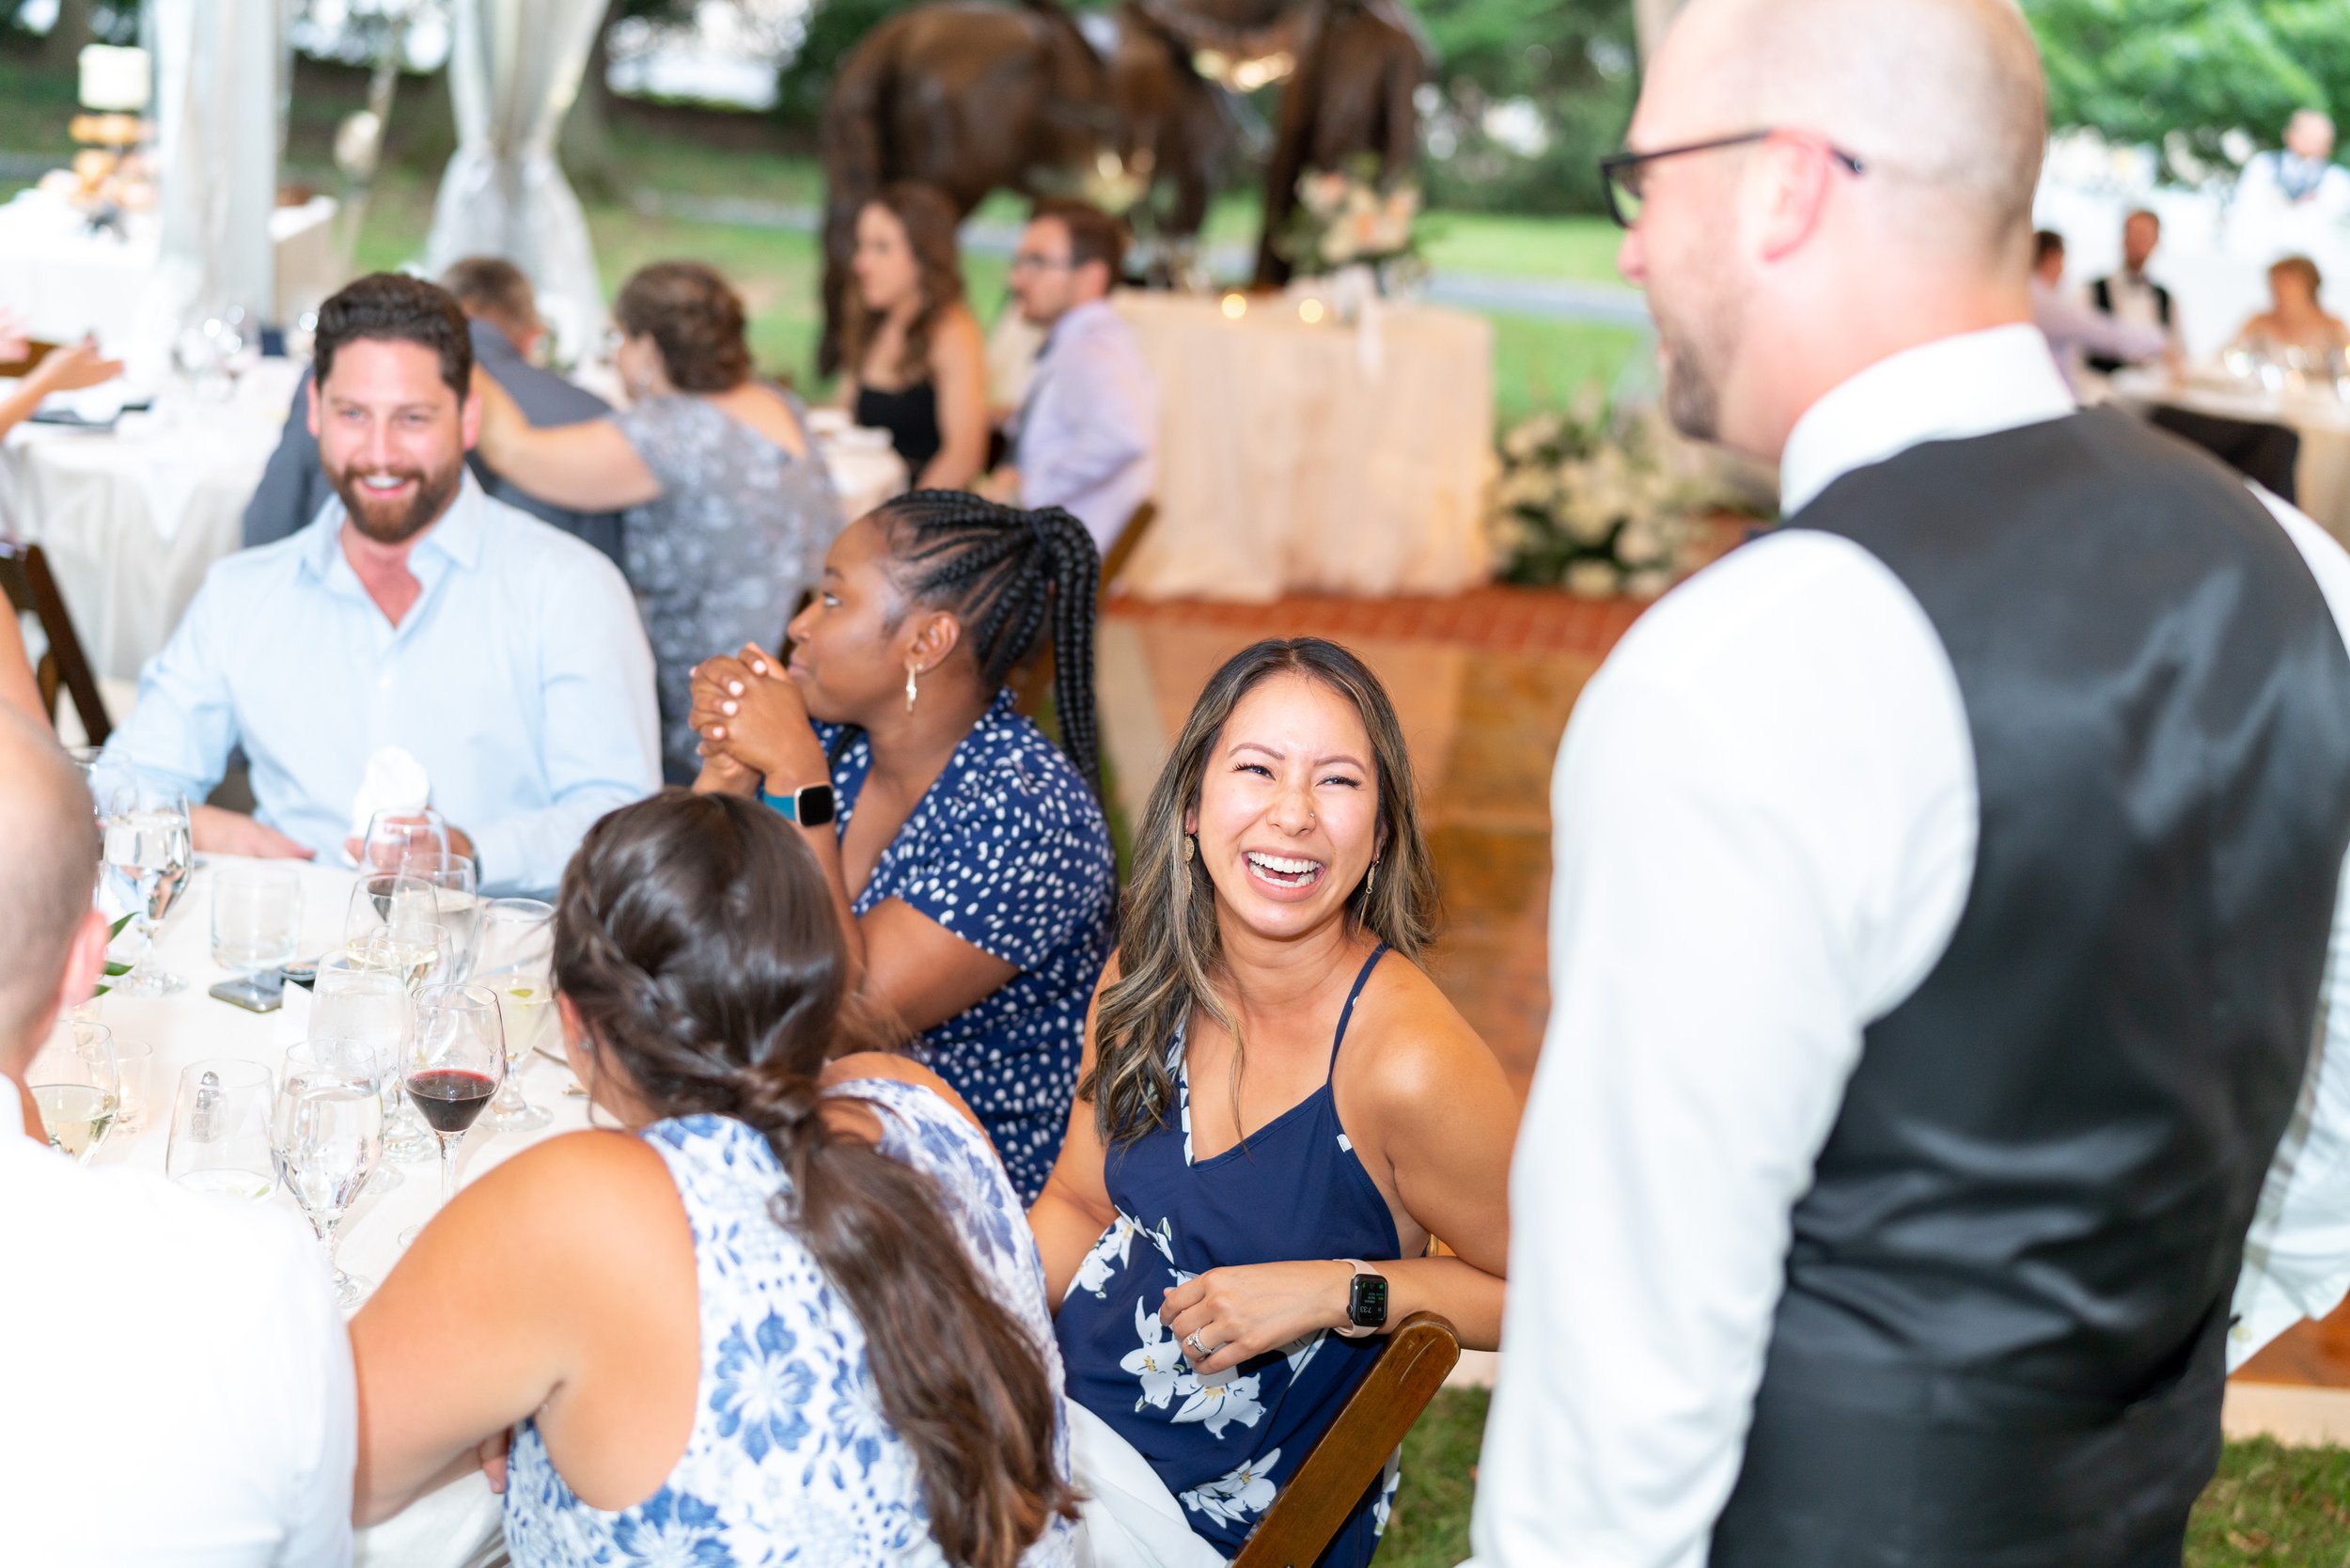 Guests laugh and smile as the groom greets them during fun wedding reception